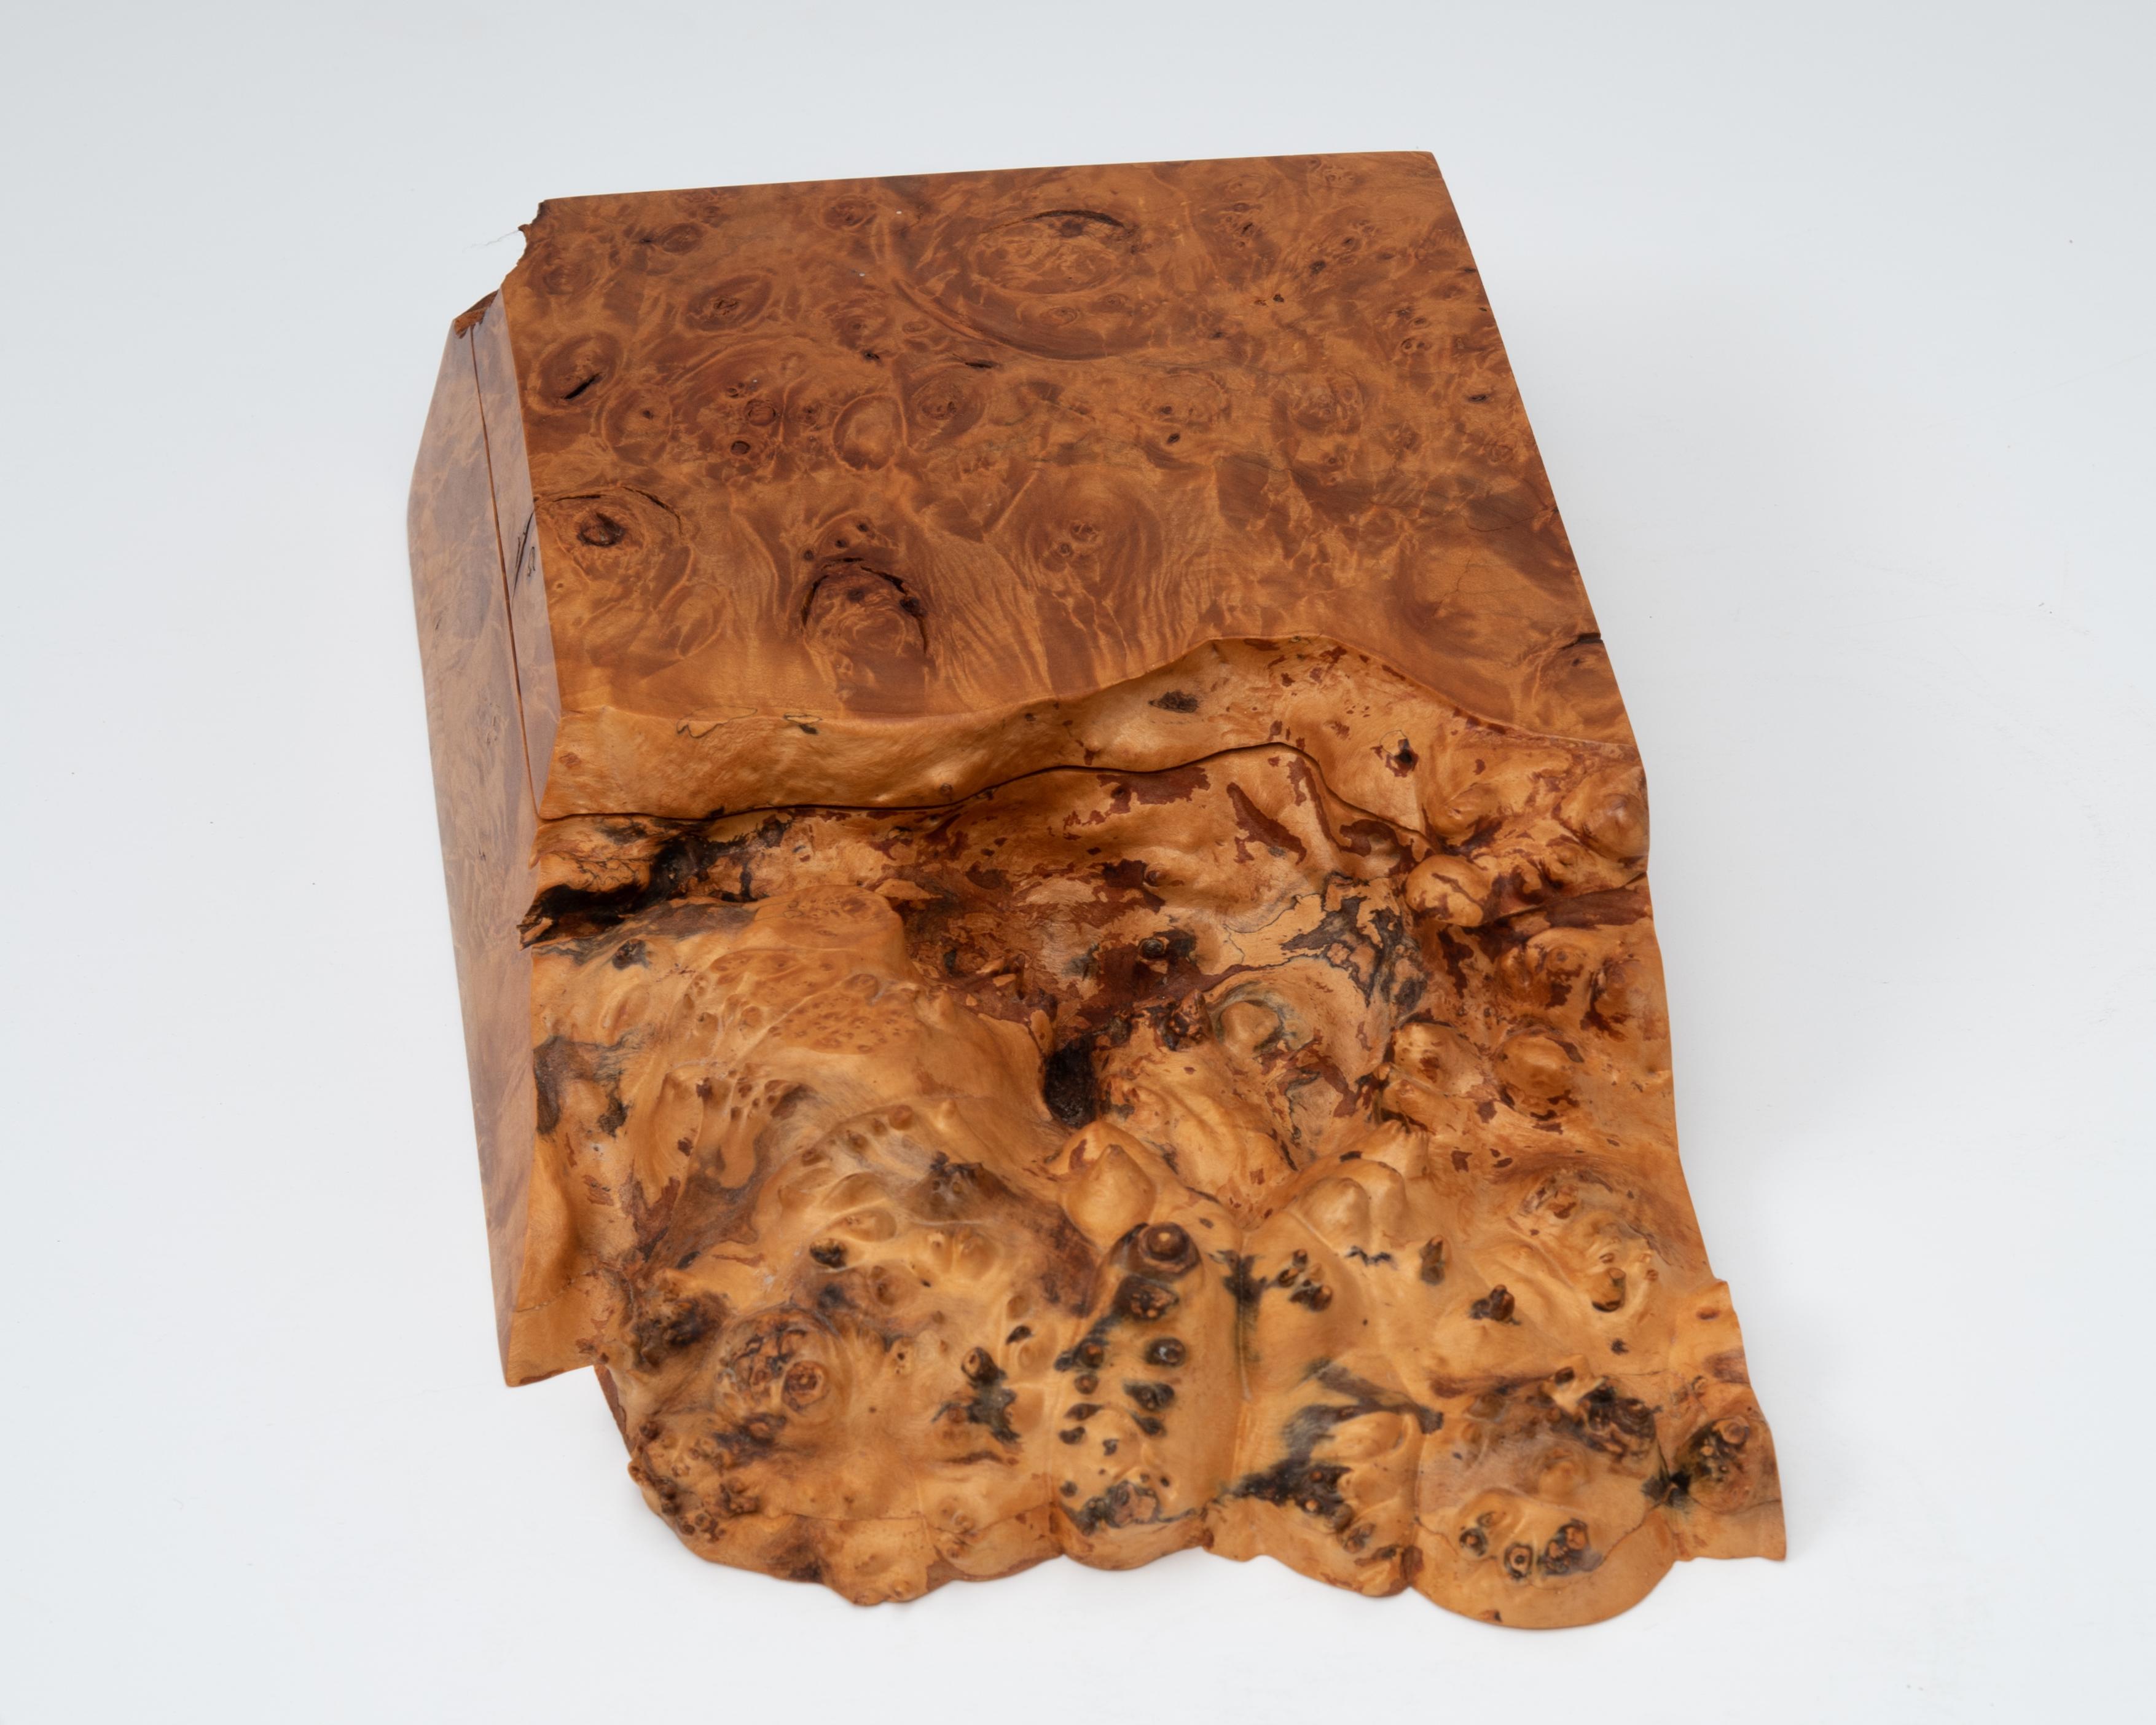 An organic modern Birdseye, burl and lightly spalted studio box by artist Michael Elkan. The hinged top opens to reveal two covered compartments for jewelry or whatnots.